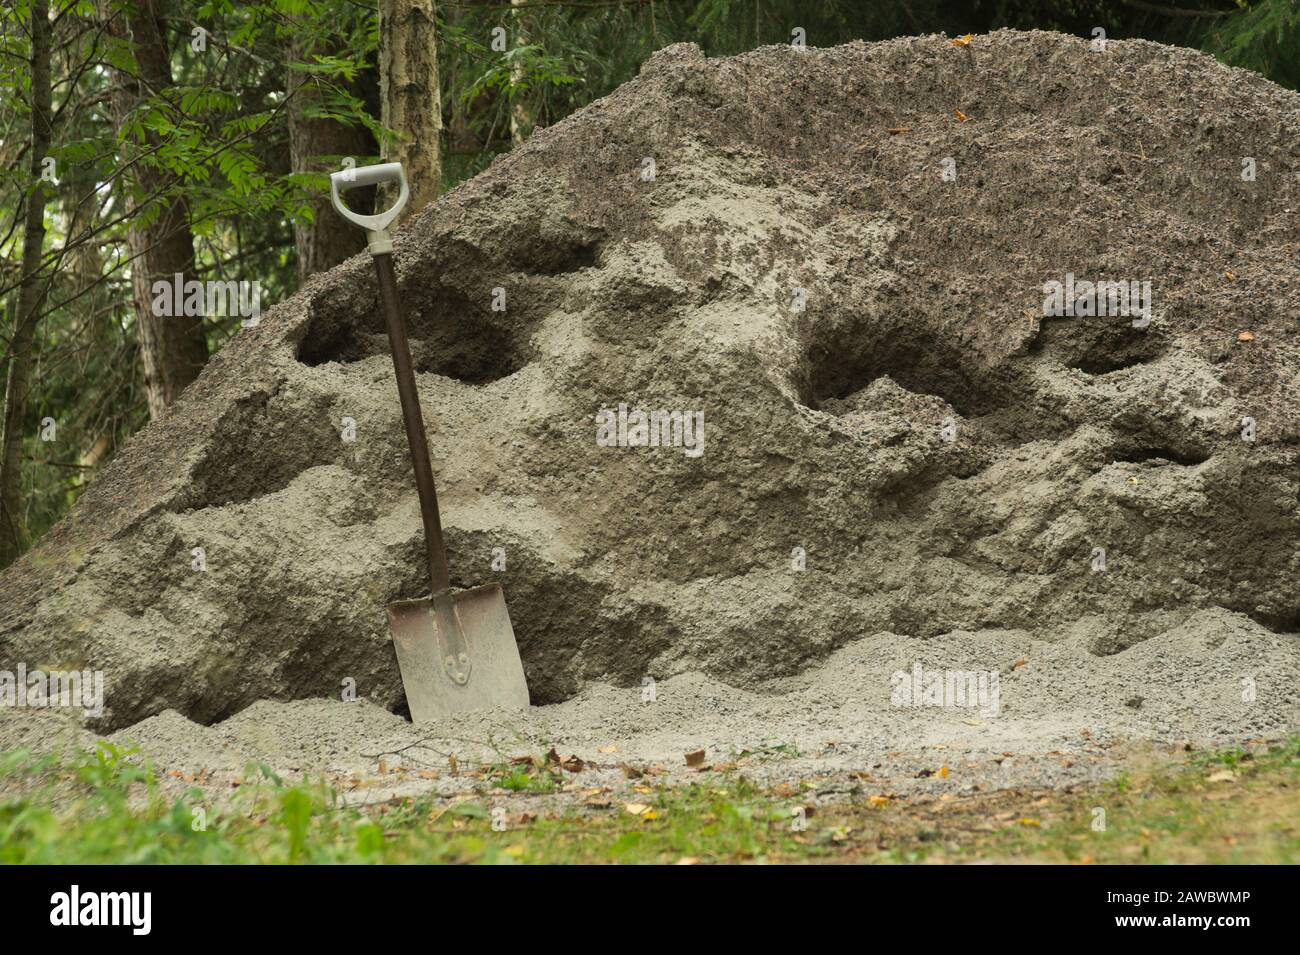 Shovel placed on a sand hill. manual labor background Stock Photo